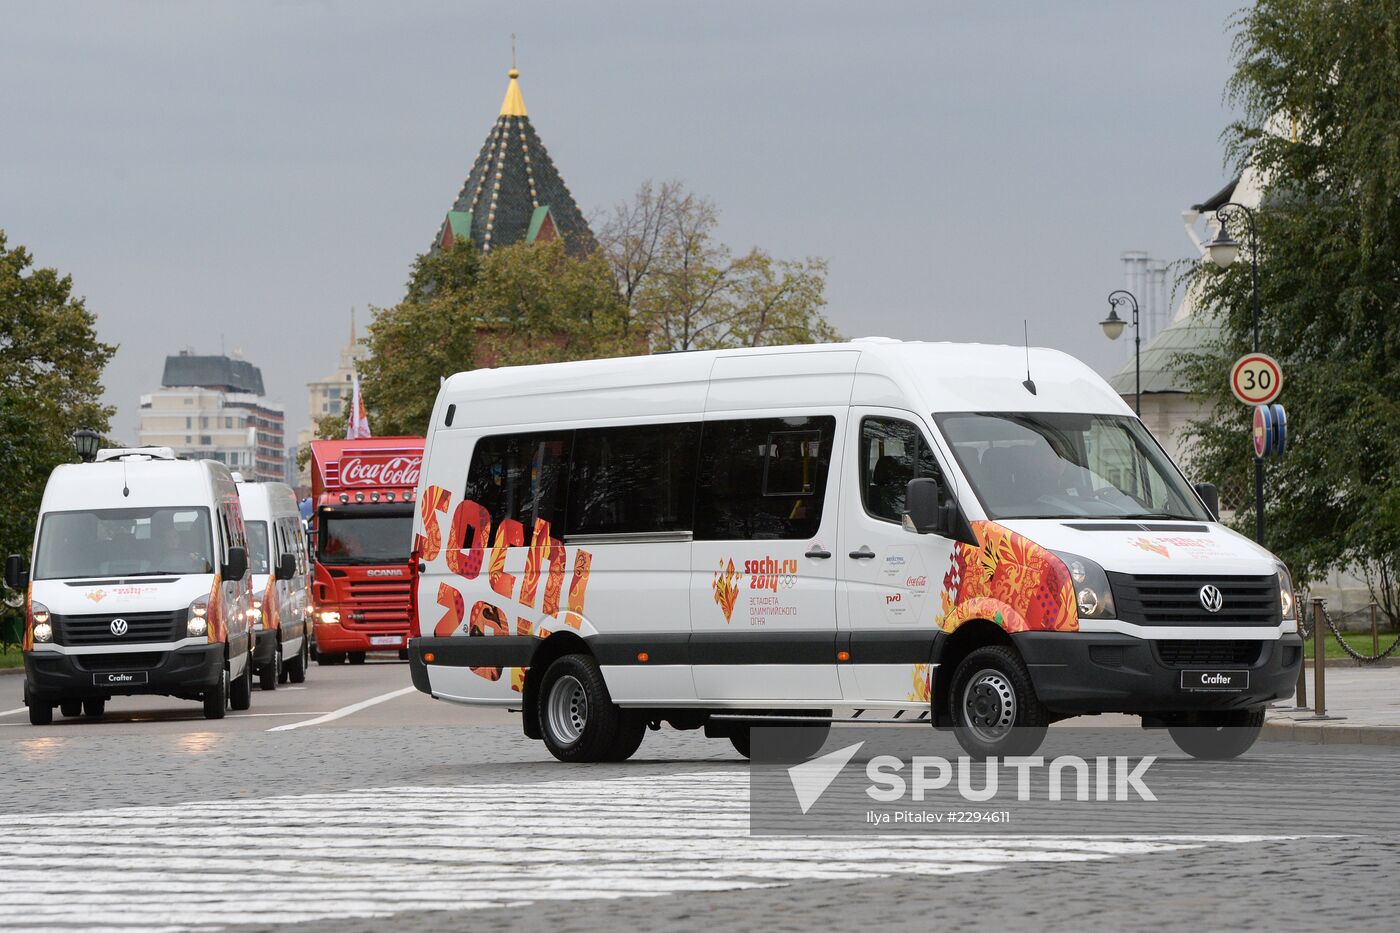 Olympic torch relay escort presented